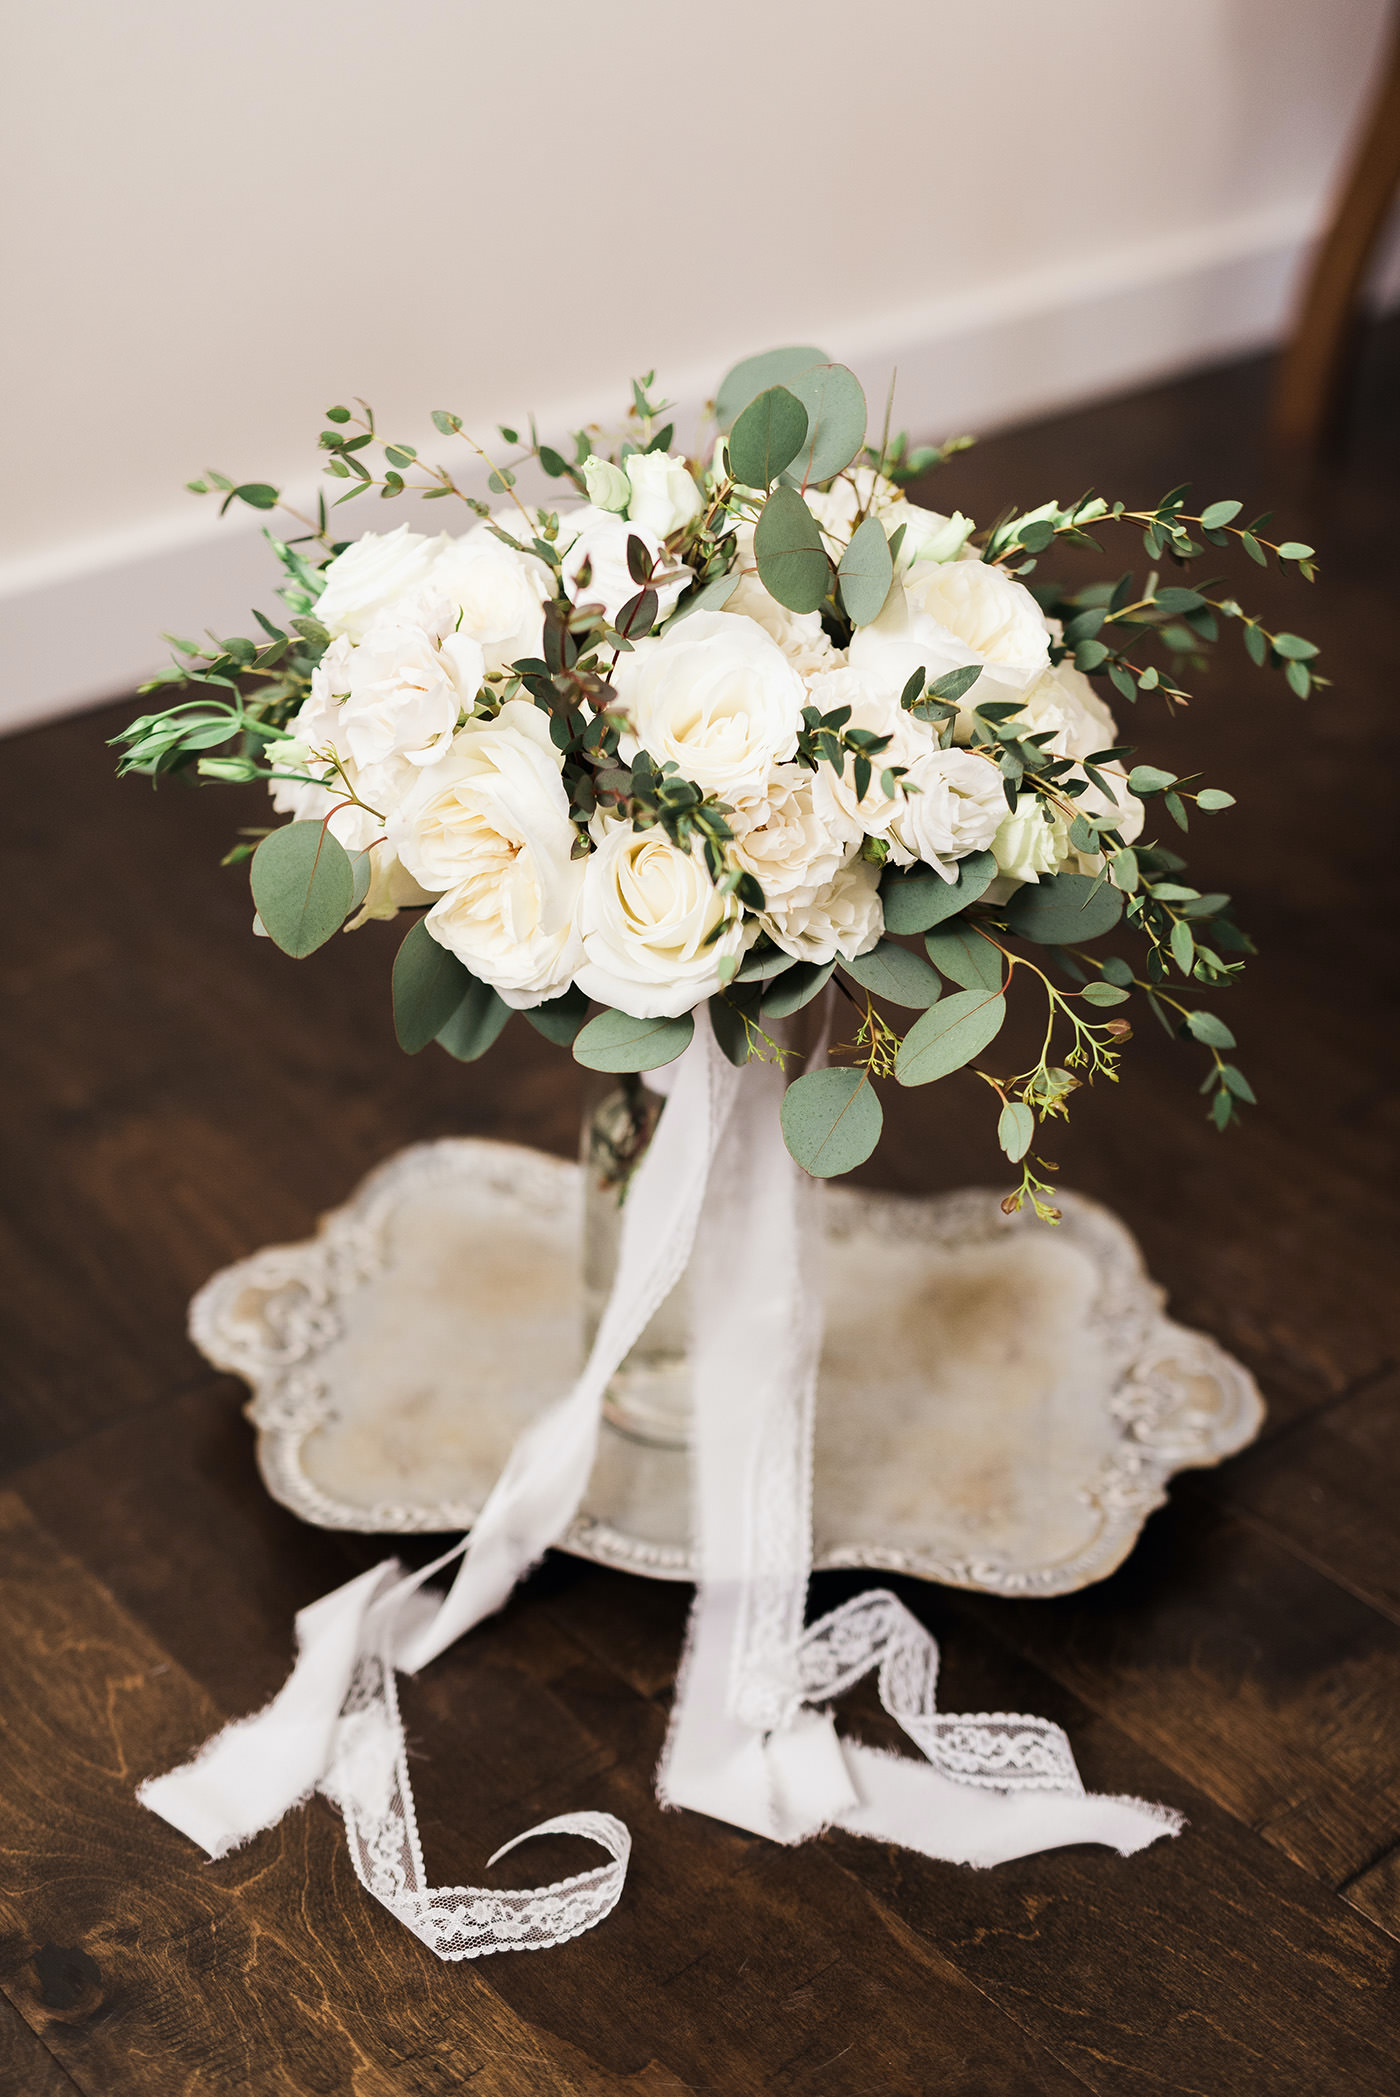 Rustic Elegant Inspired Wedding Ceremony Decor, Round Ivory Rose Bridesmaid Bouquet with Greenery and Lace Ribbon, on Antique Tray | Florida Wedding Planner and Floral Designer John Campbell Weddings